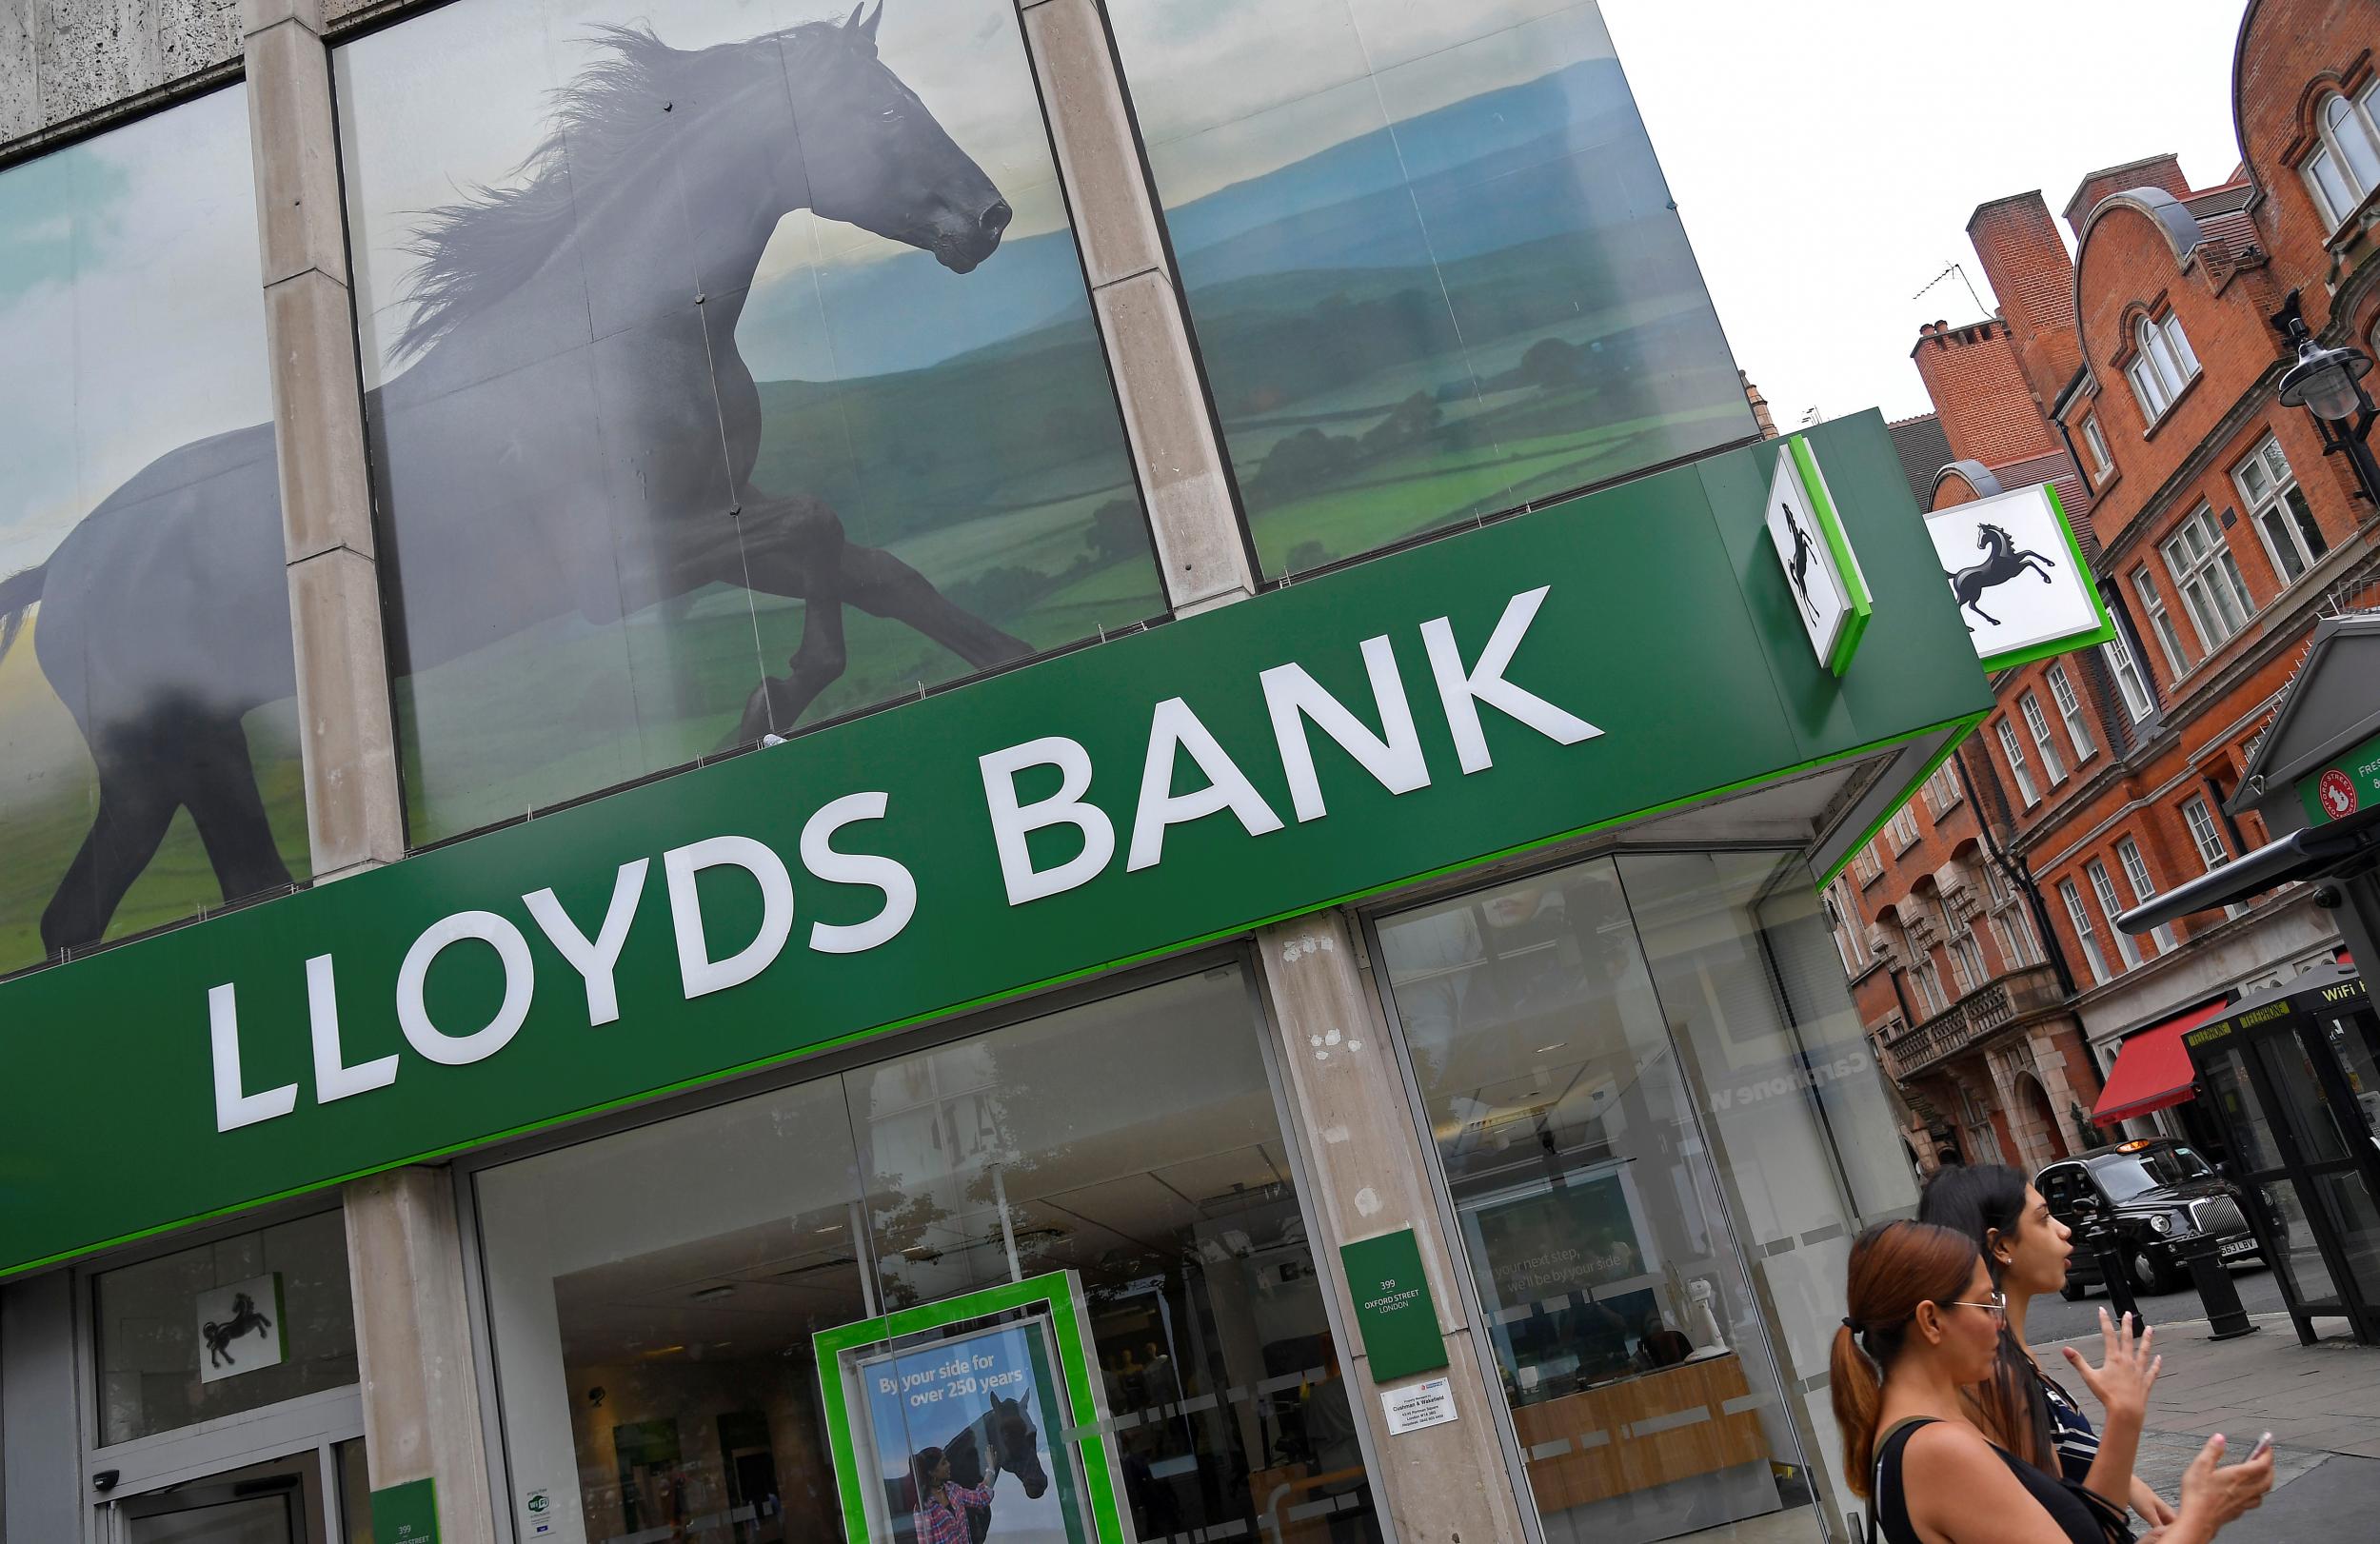 'It appears these changes at Lloyds will increase the charges for the vast majority of customers with overdrafts,' Ms Reeves said